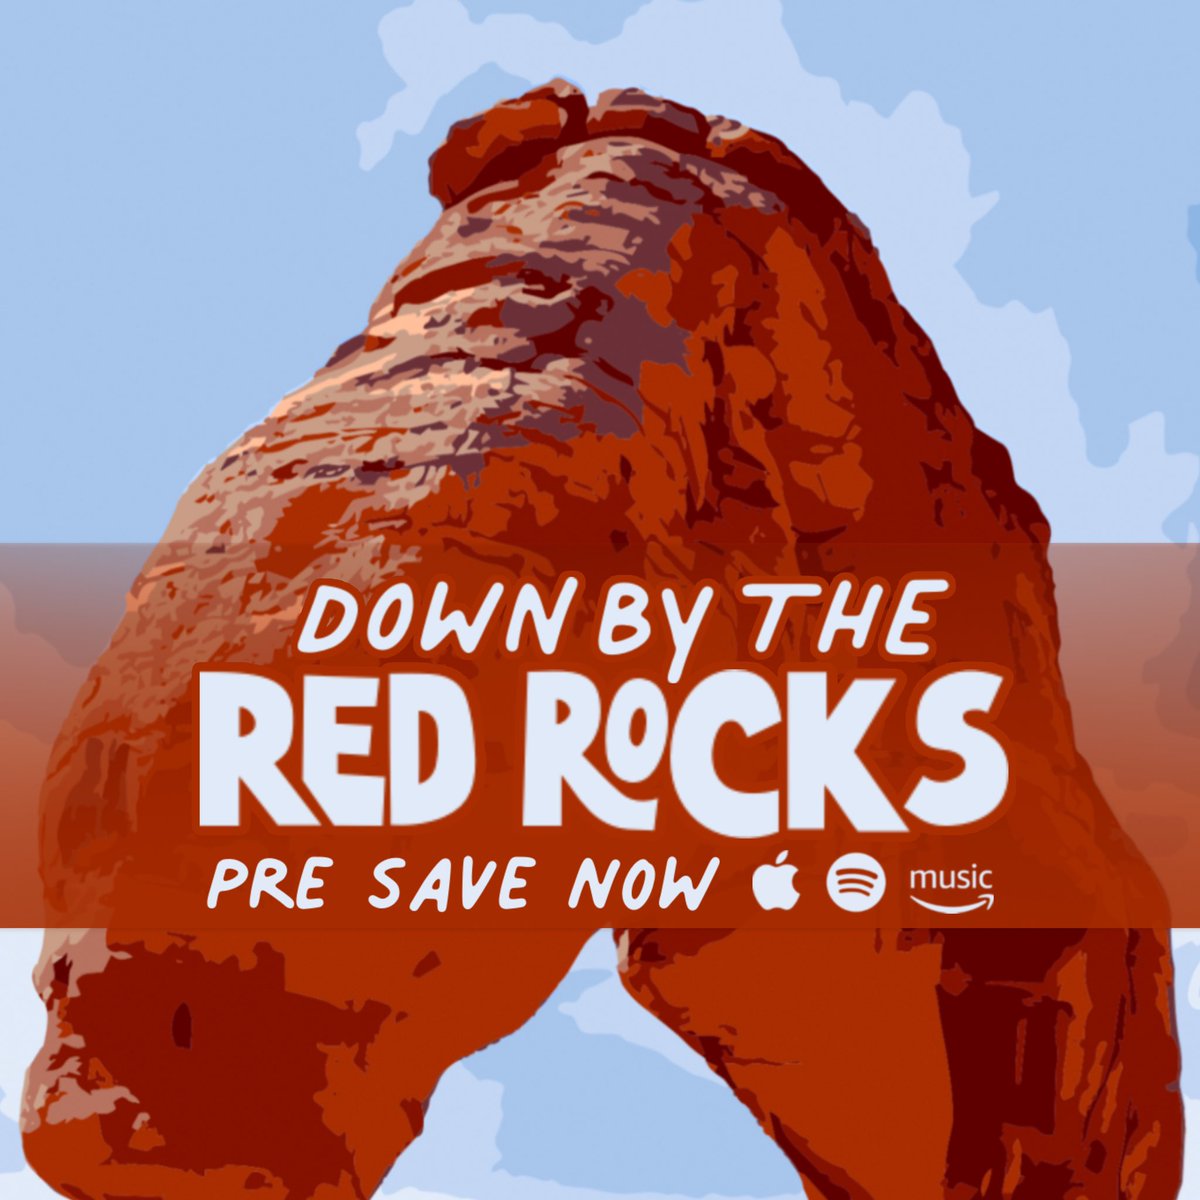 Can’t wait to share this summer jam with you!
Down by the Red Rocks will be out 2 weeks from today:)

You can pre-save it here now! #newmusic #presave #redrocks